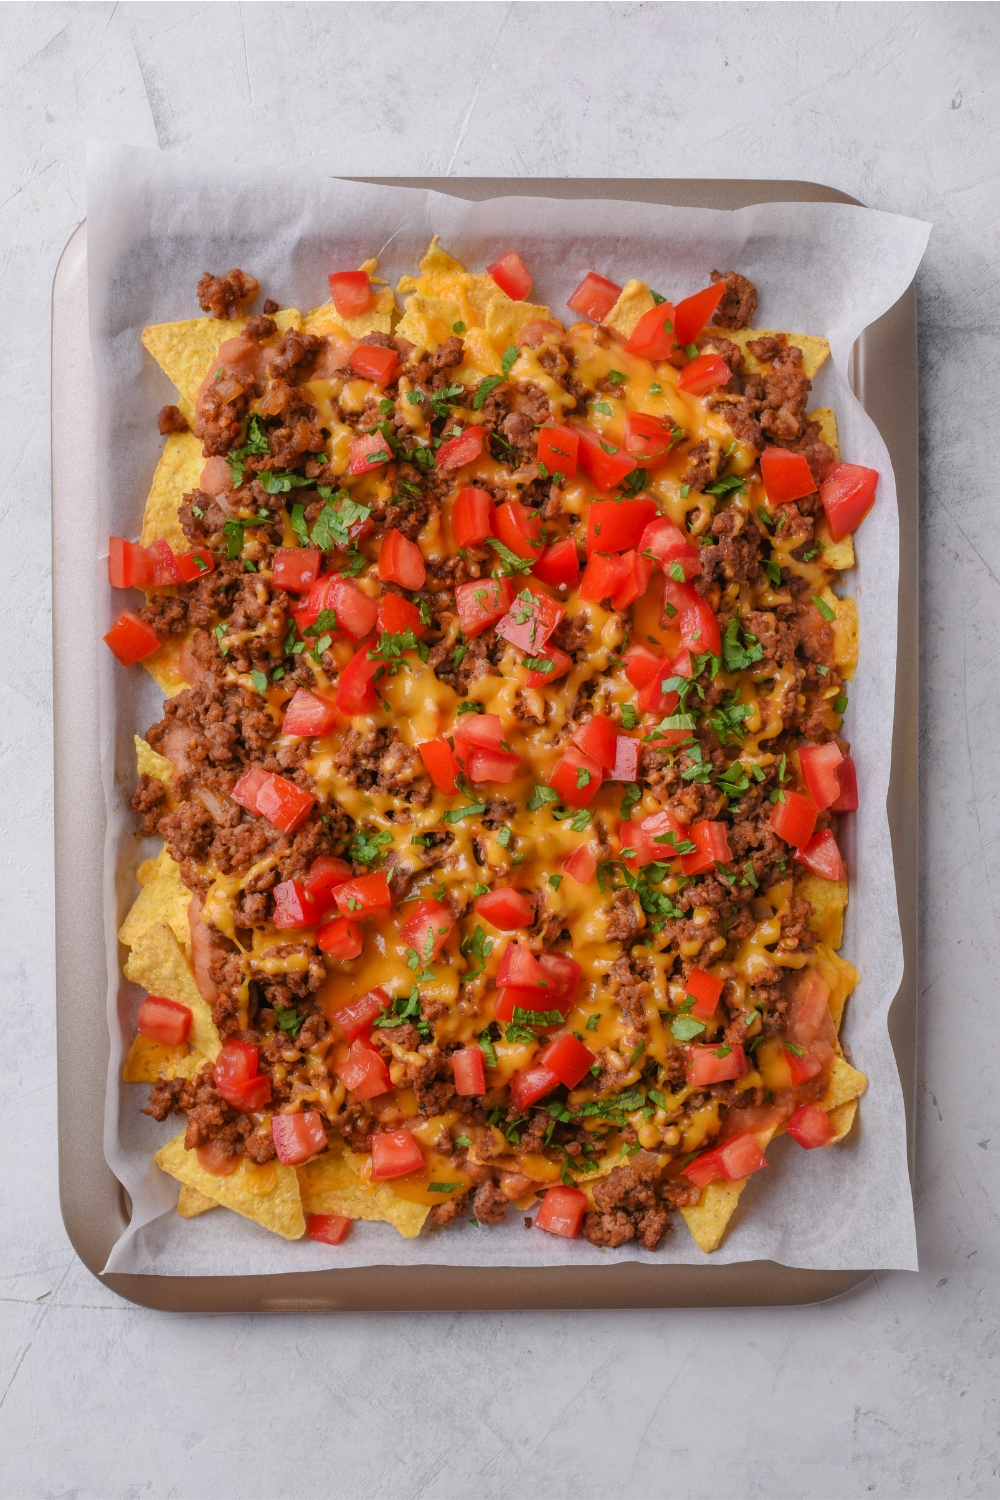 A baking sheet lined with parchment paper topped with tortilla chips, ground beef, melted cheese, chopped tomatoes, and cilantro.